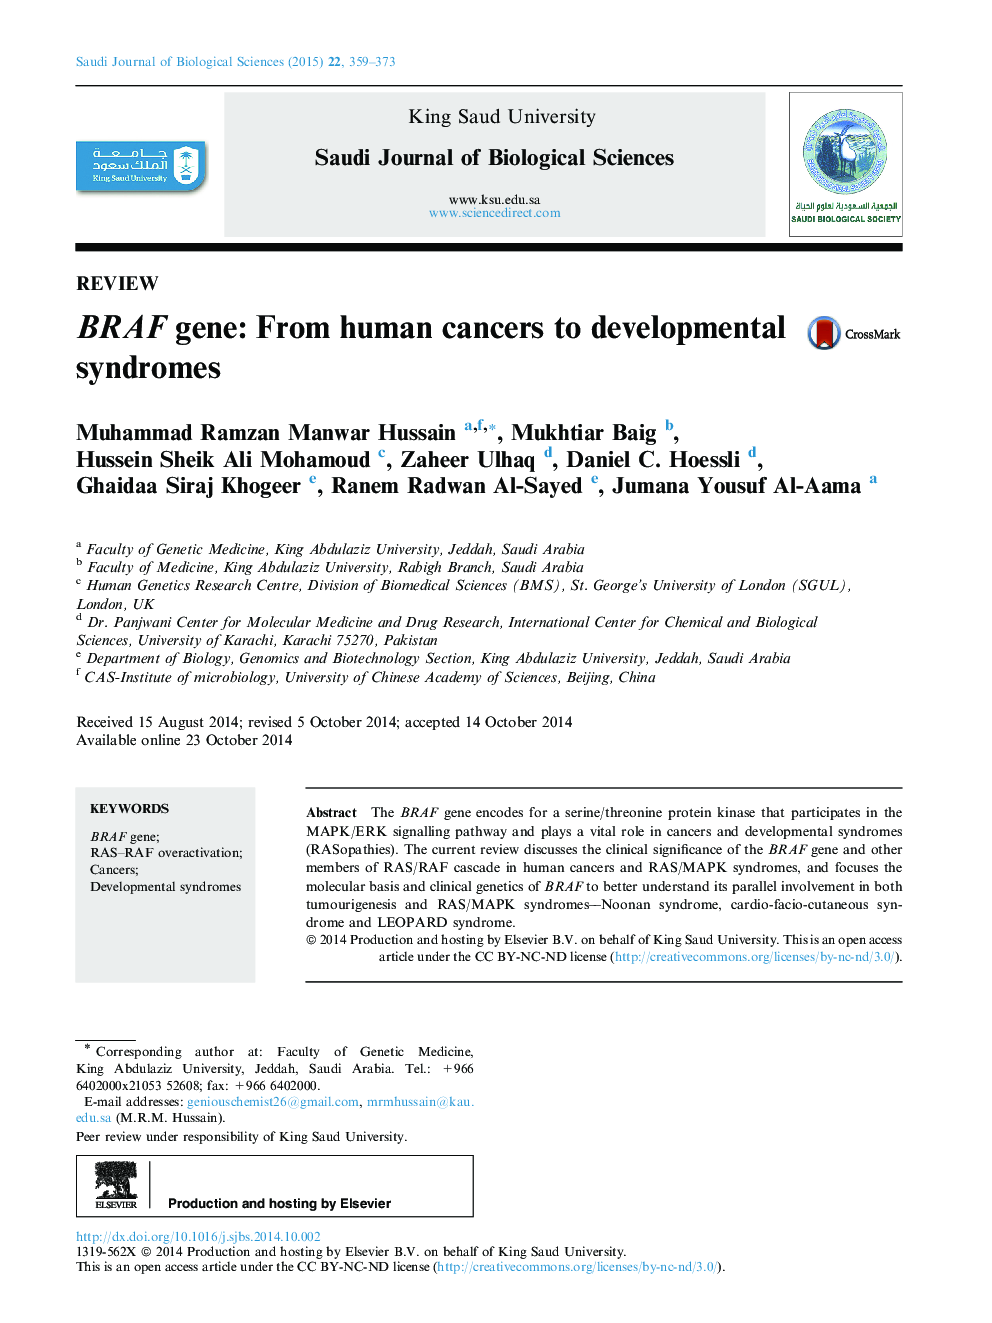 BRAF gene: From human cancers to developmental syndromes 